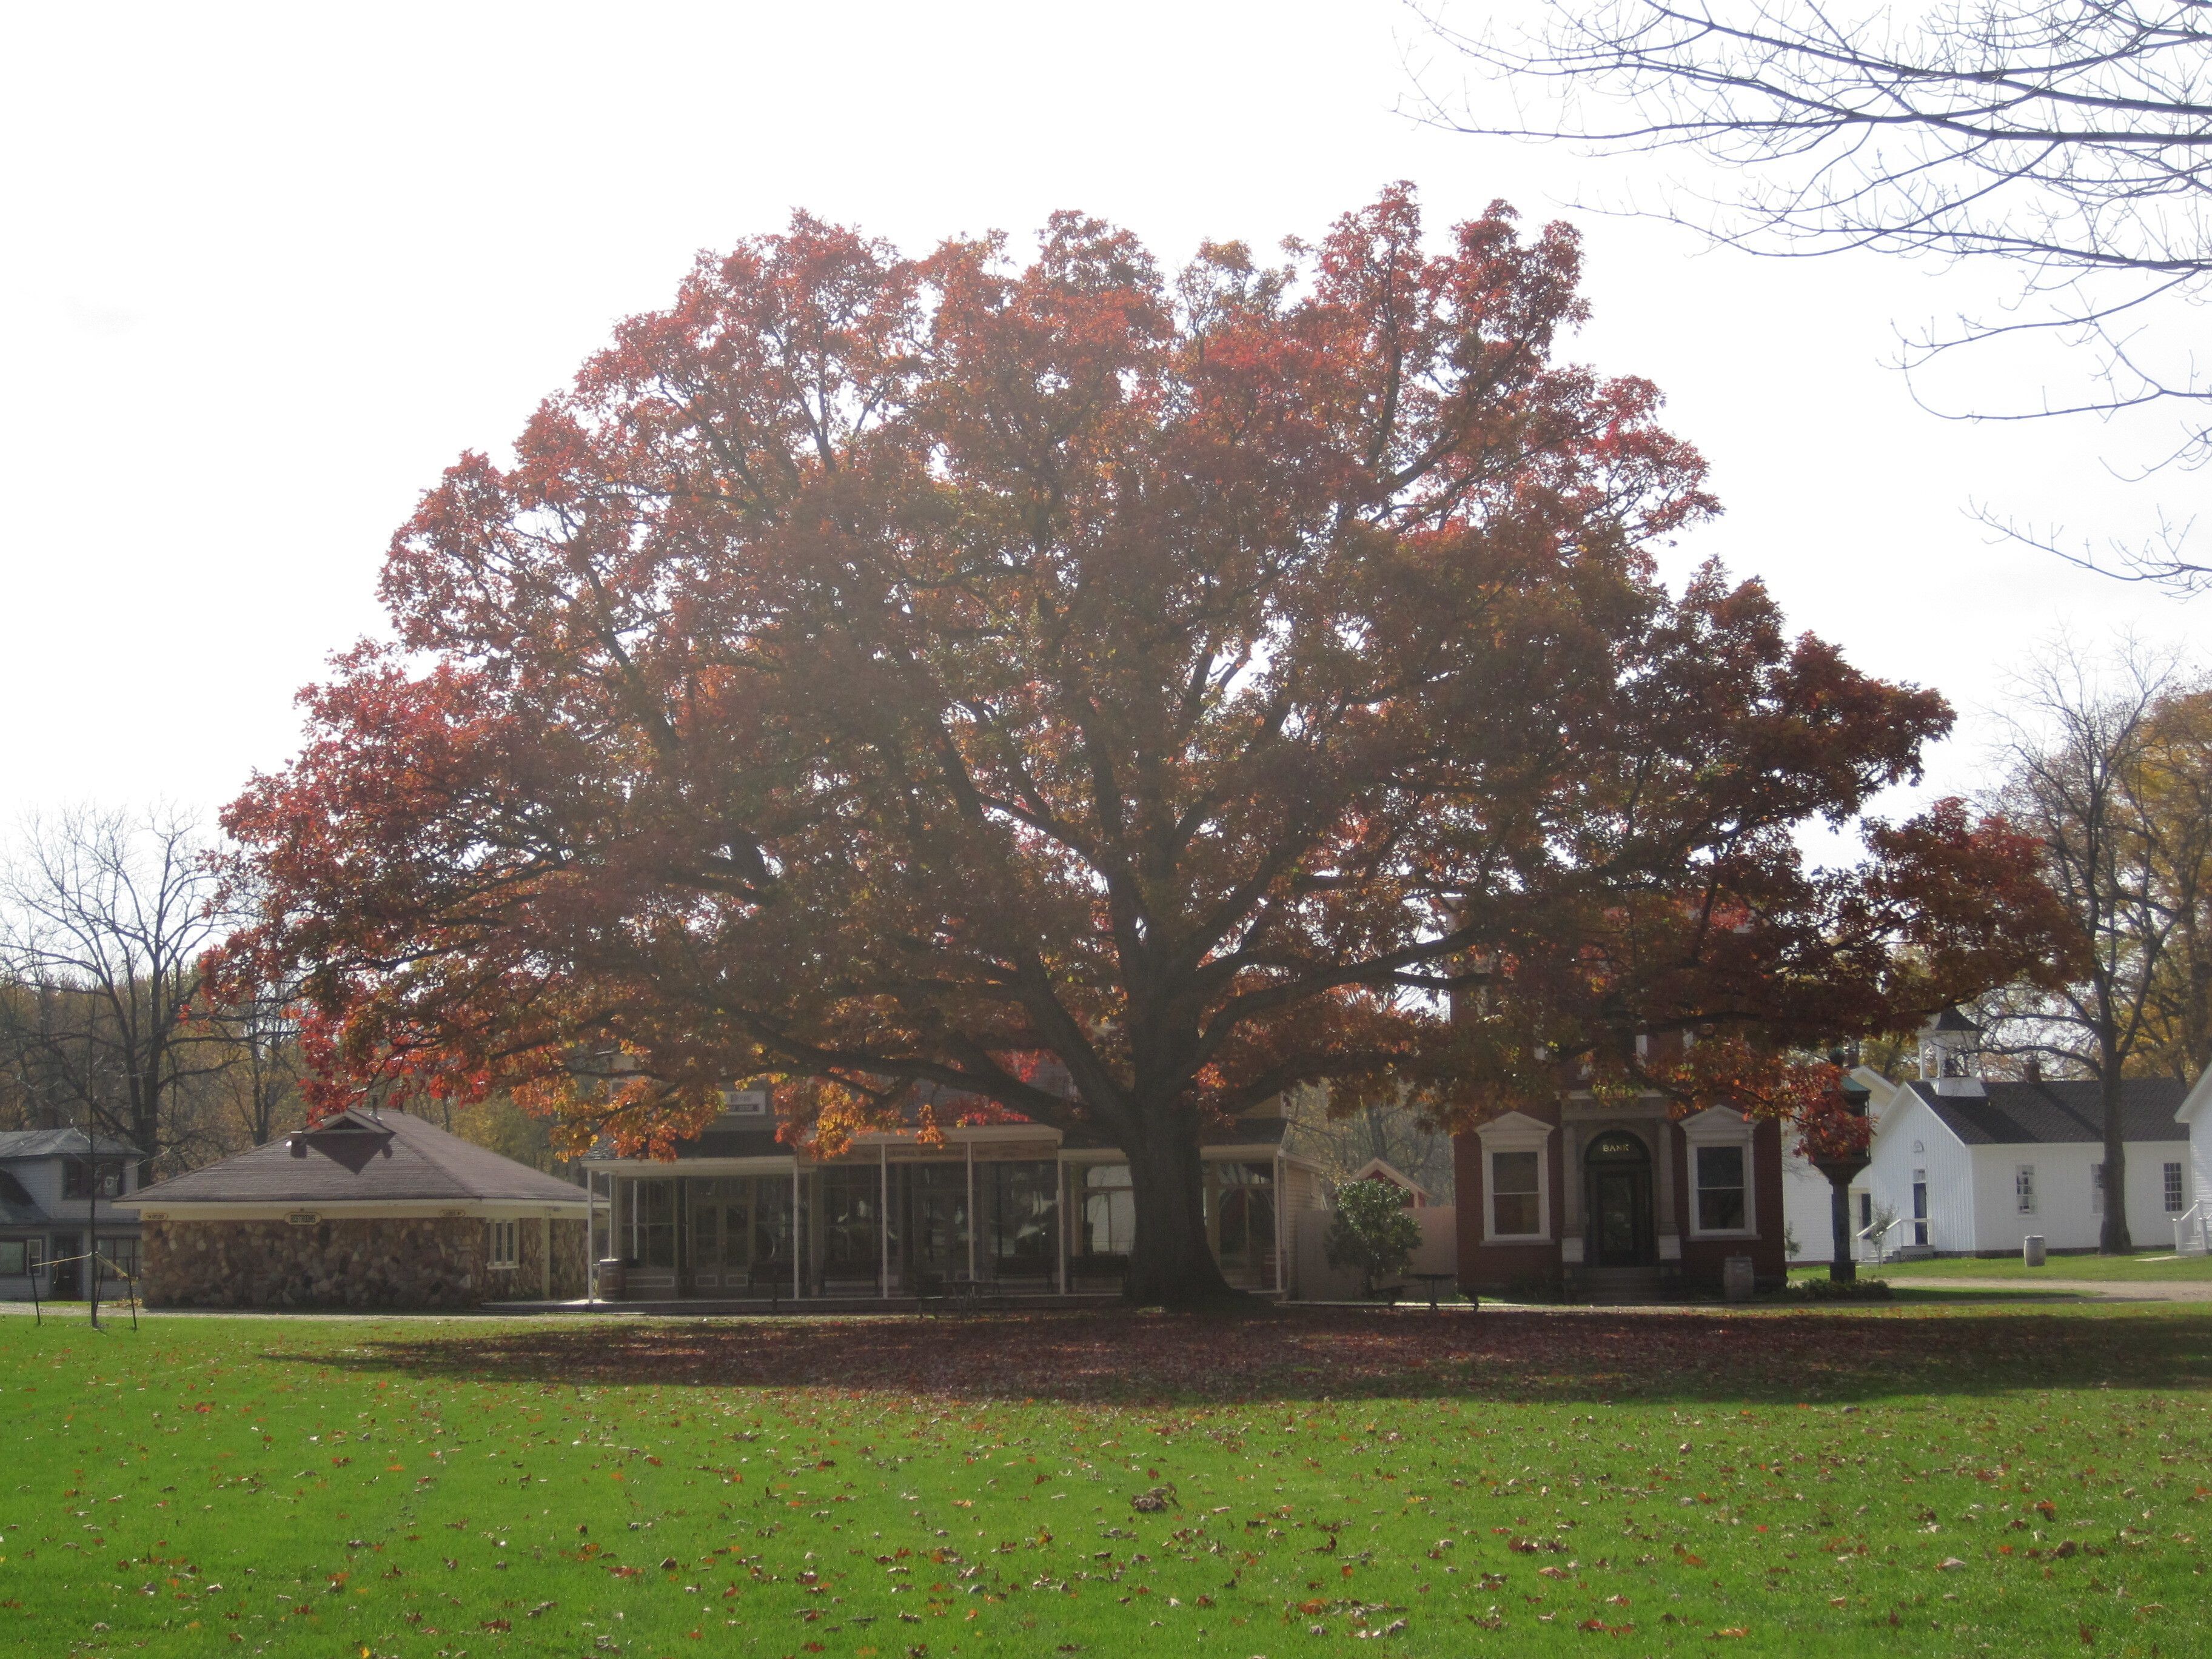 Large white oak on the Village Green in front of Main Street.